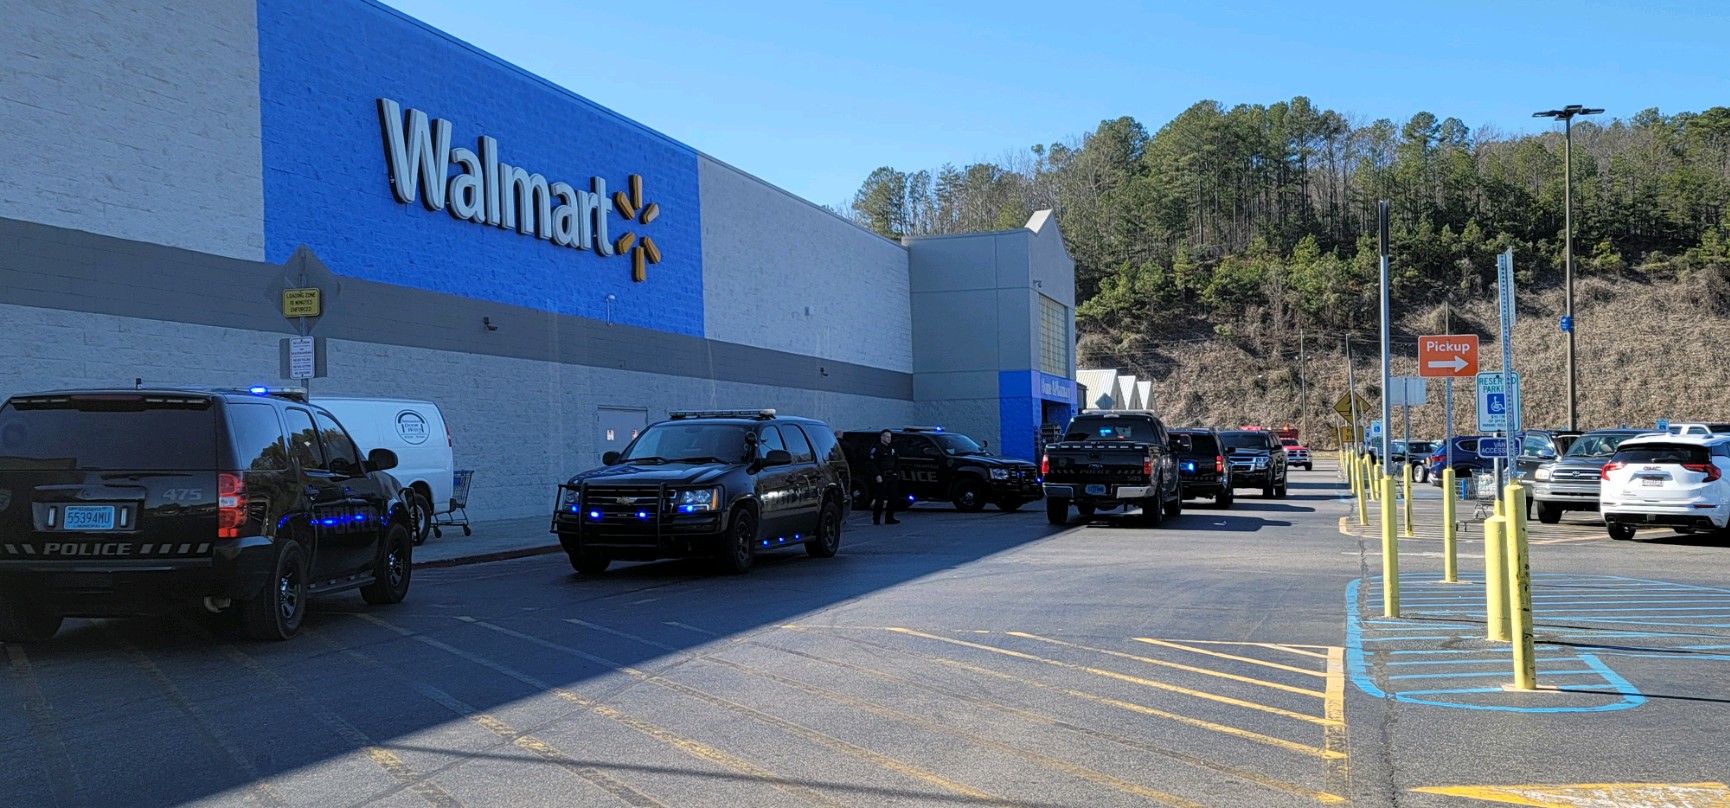 4 detained after shooting at Trussville Walmart